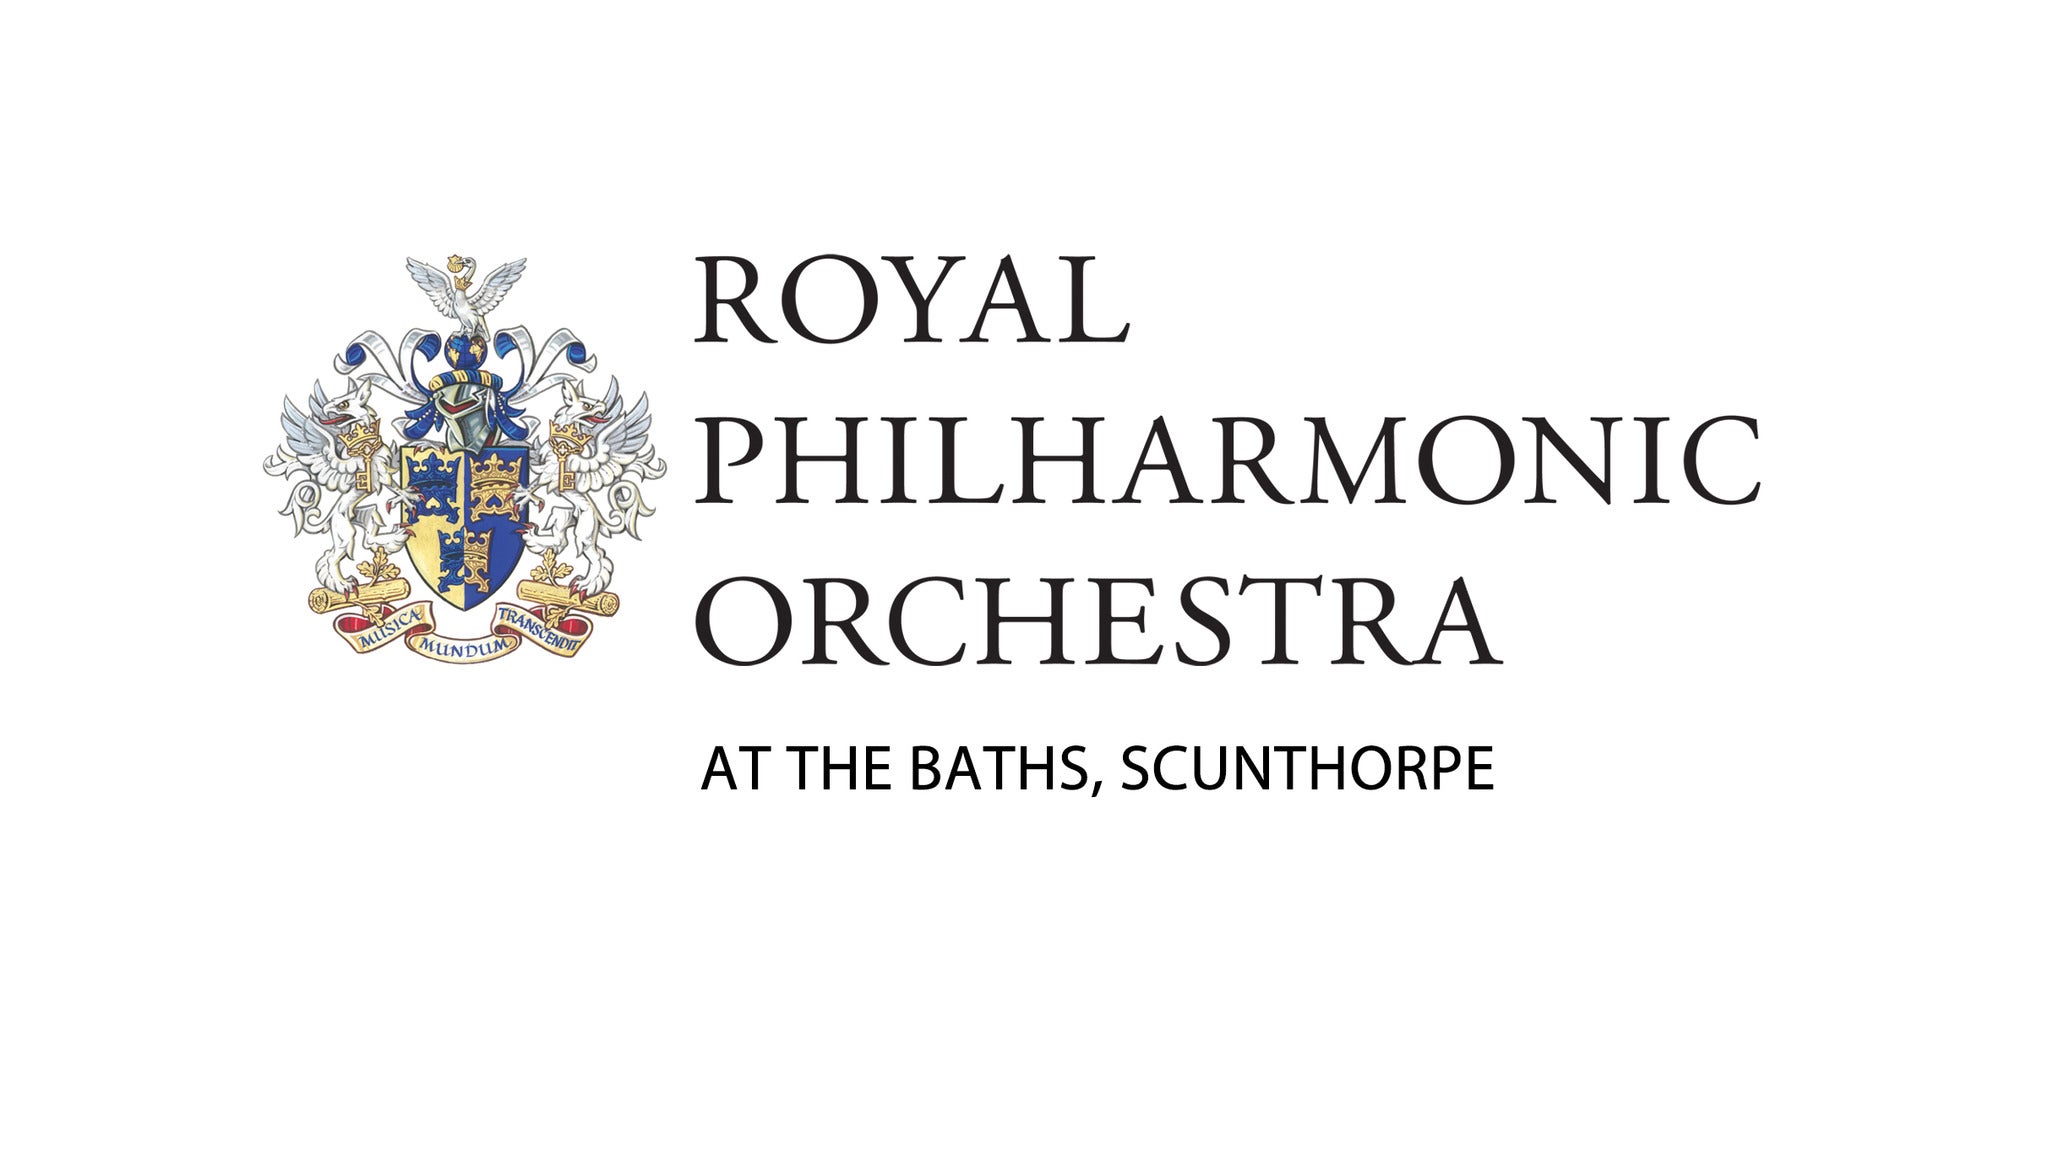 Sound On the Ground - Royal Philharmonic Concert Orchestra Event Title Pic